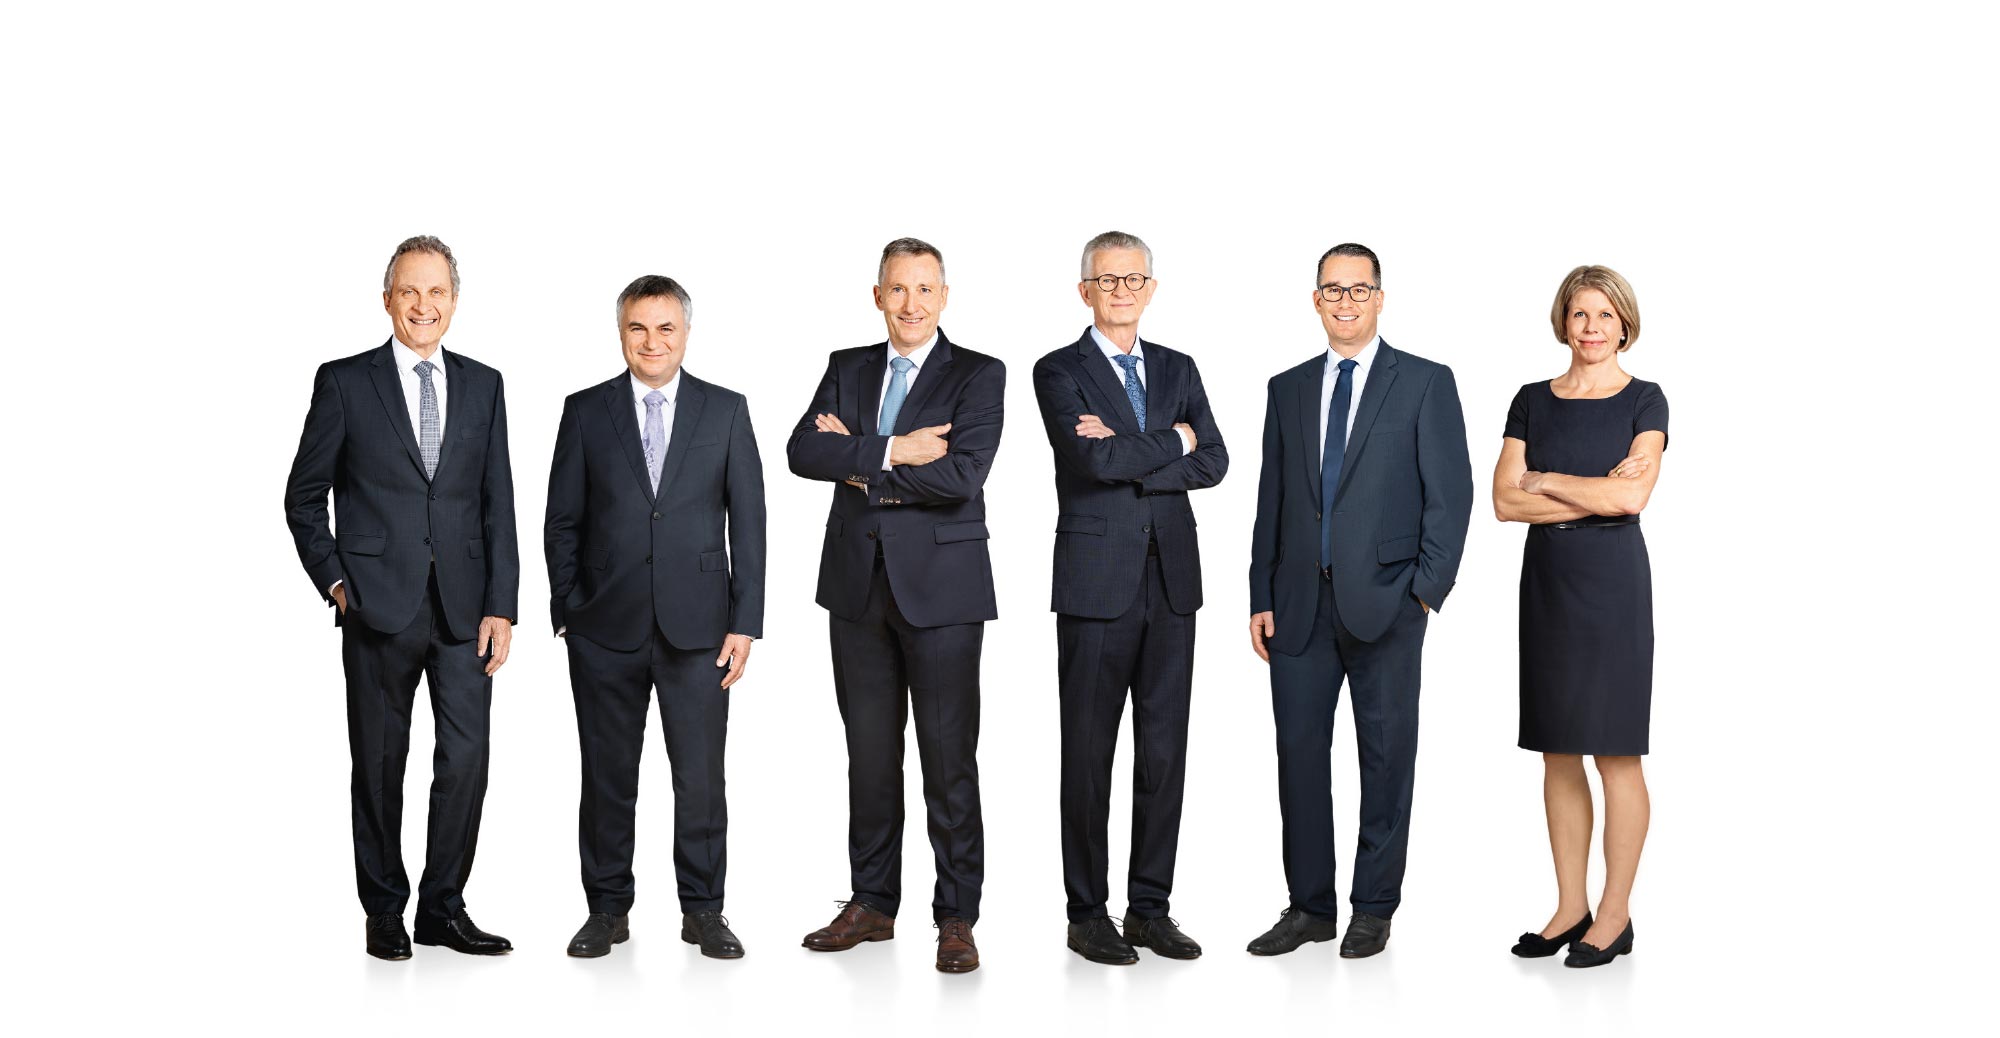 Portrait of the executive board members